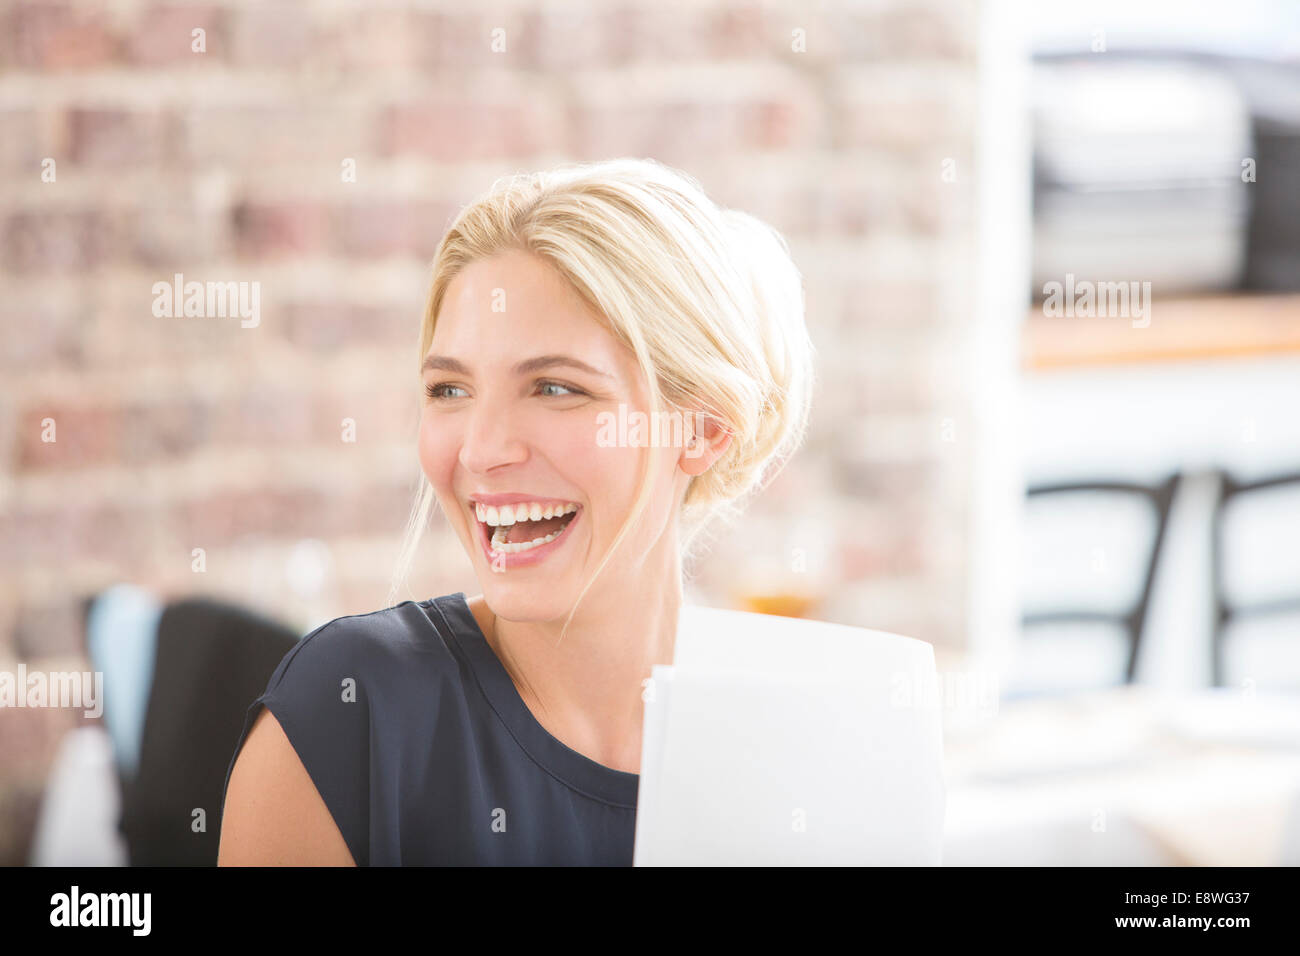 Woman laughing in office Stock Photo